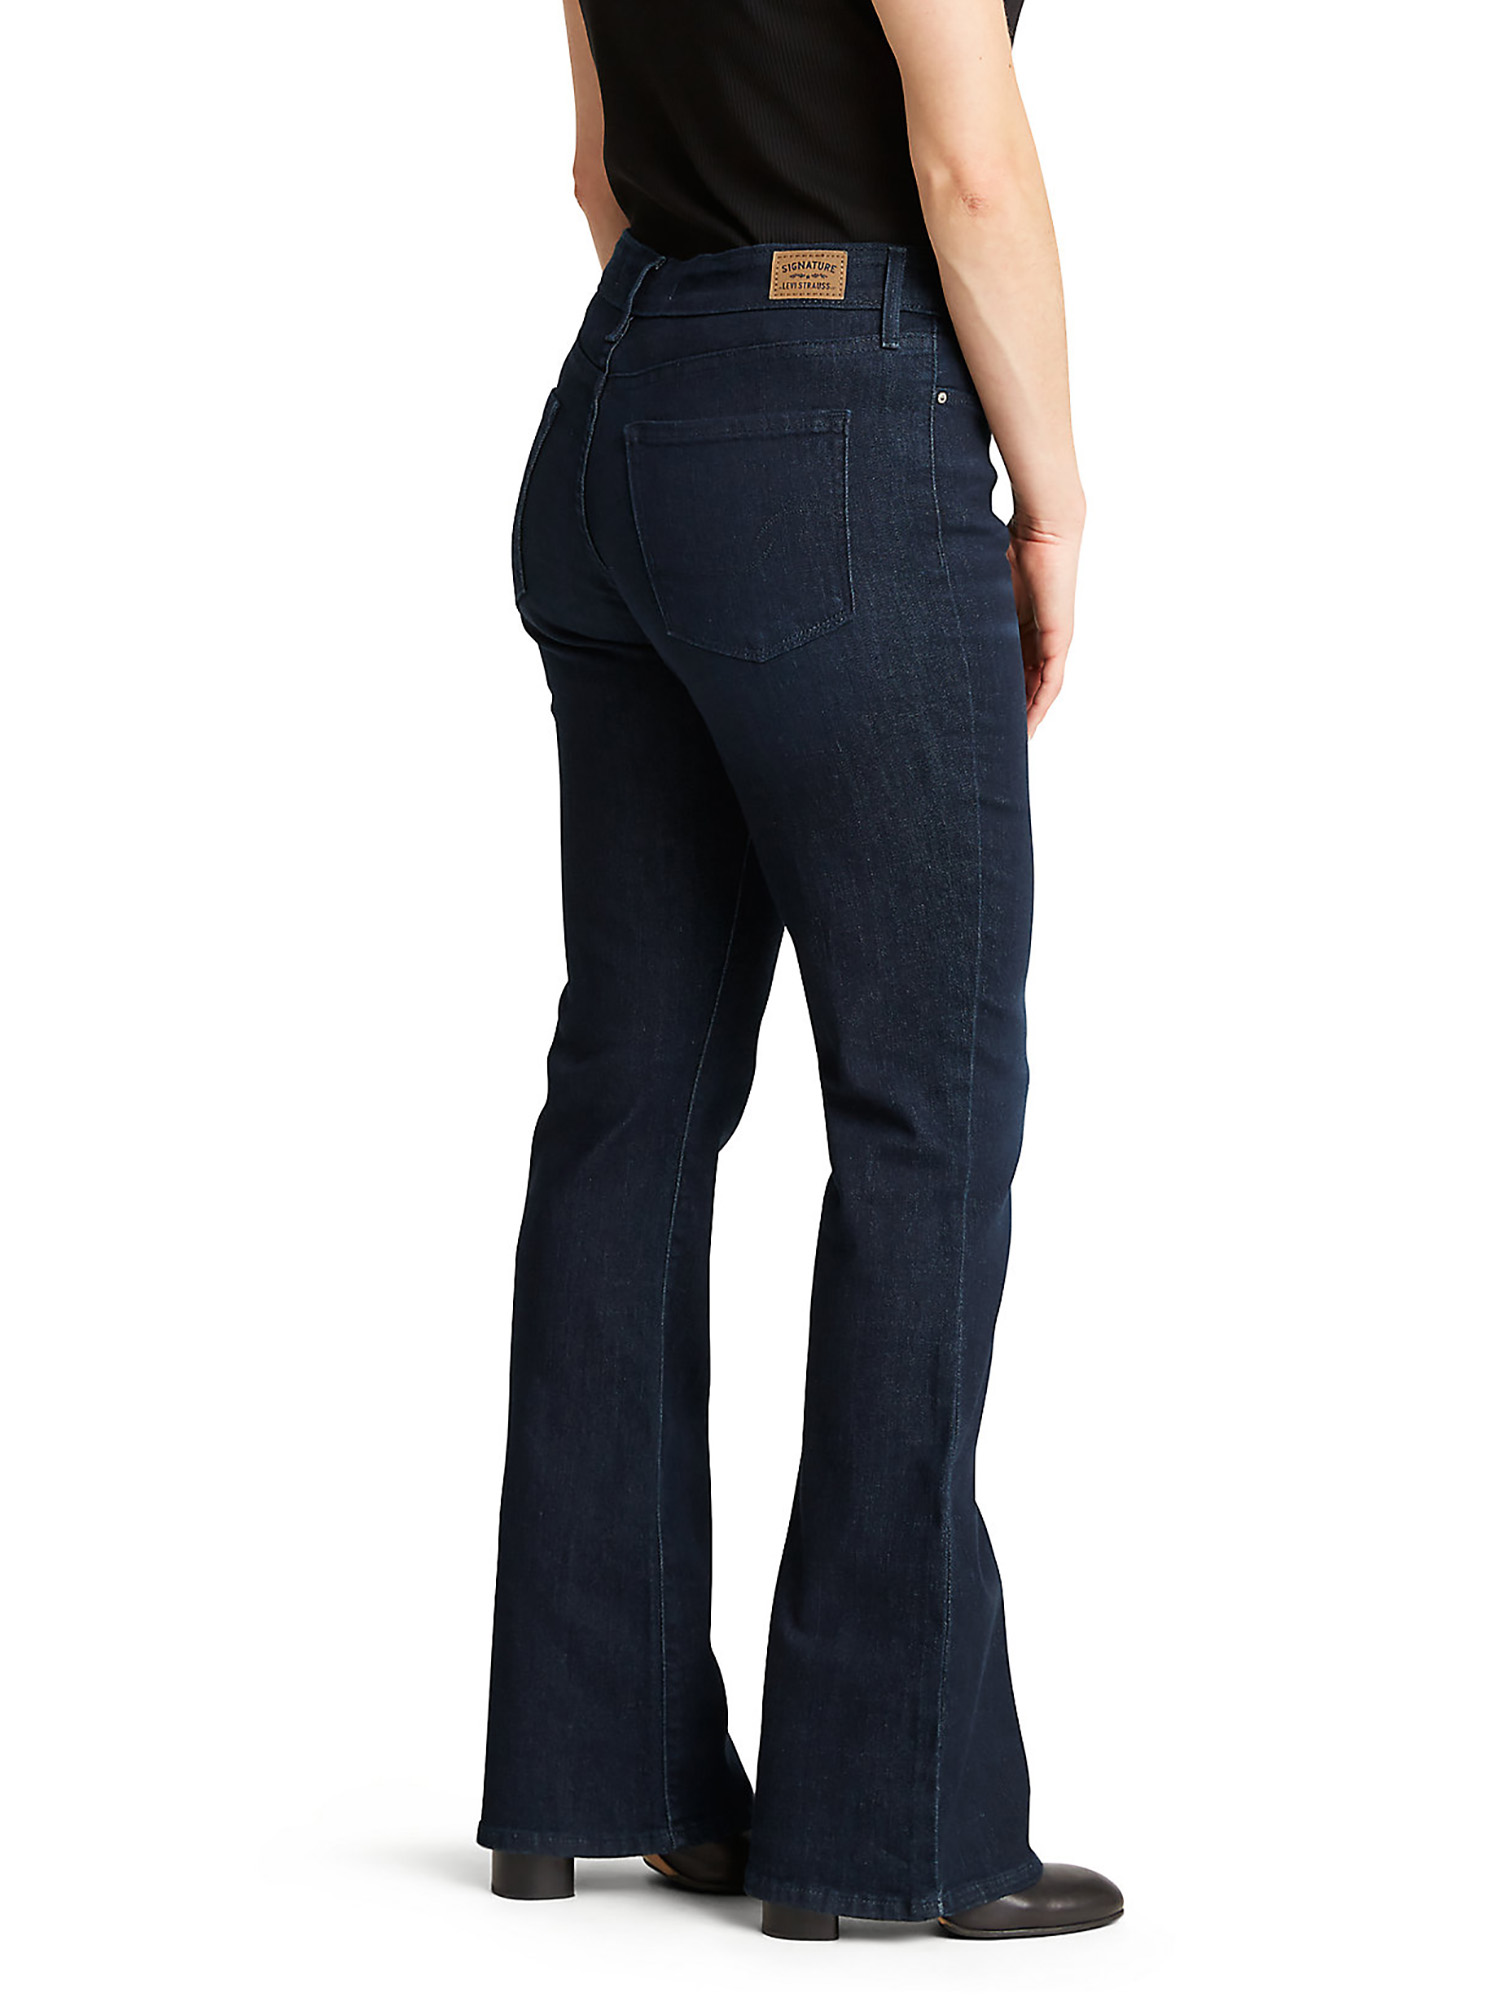 Signature by Levi Strauss & Co. Women's and Women's Plus Modern Bootcut Jeans - image 3 of 6